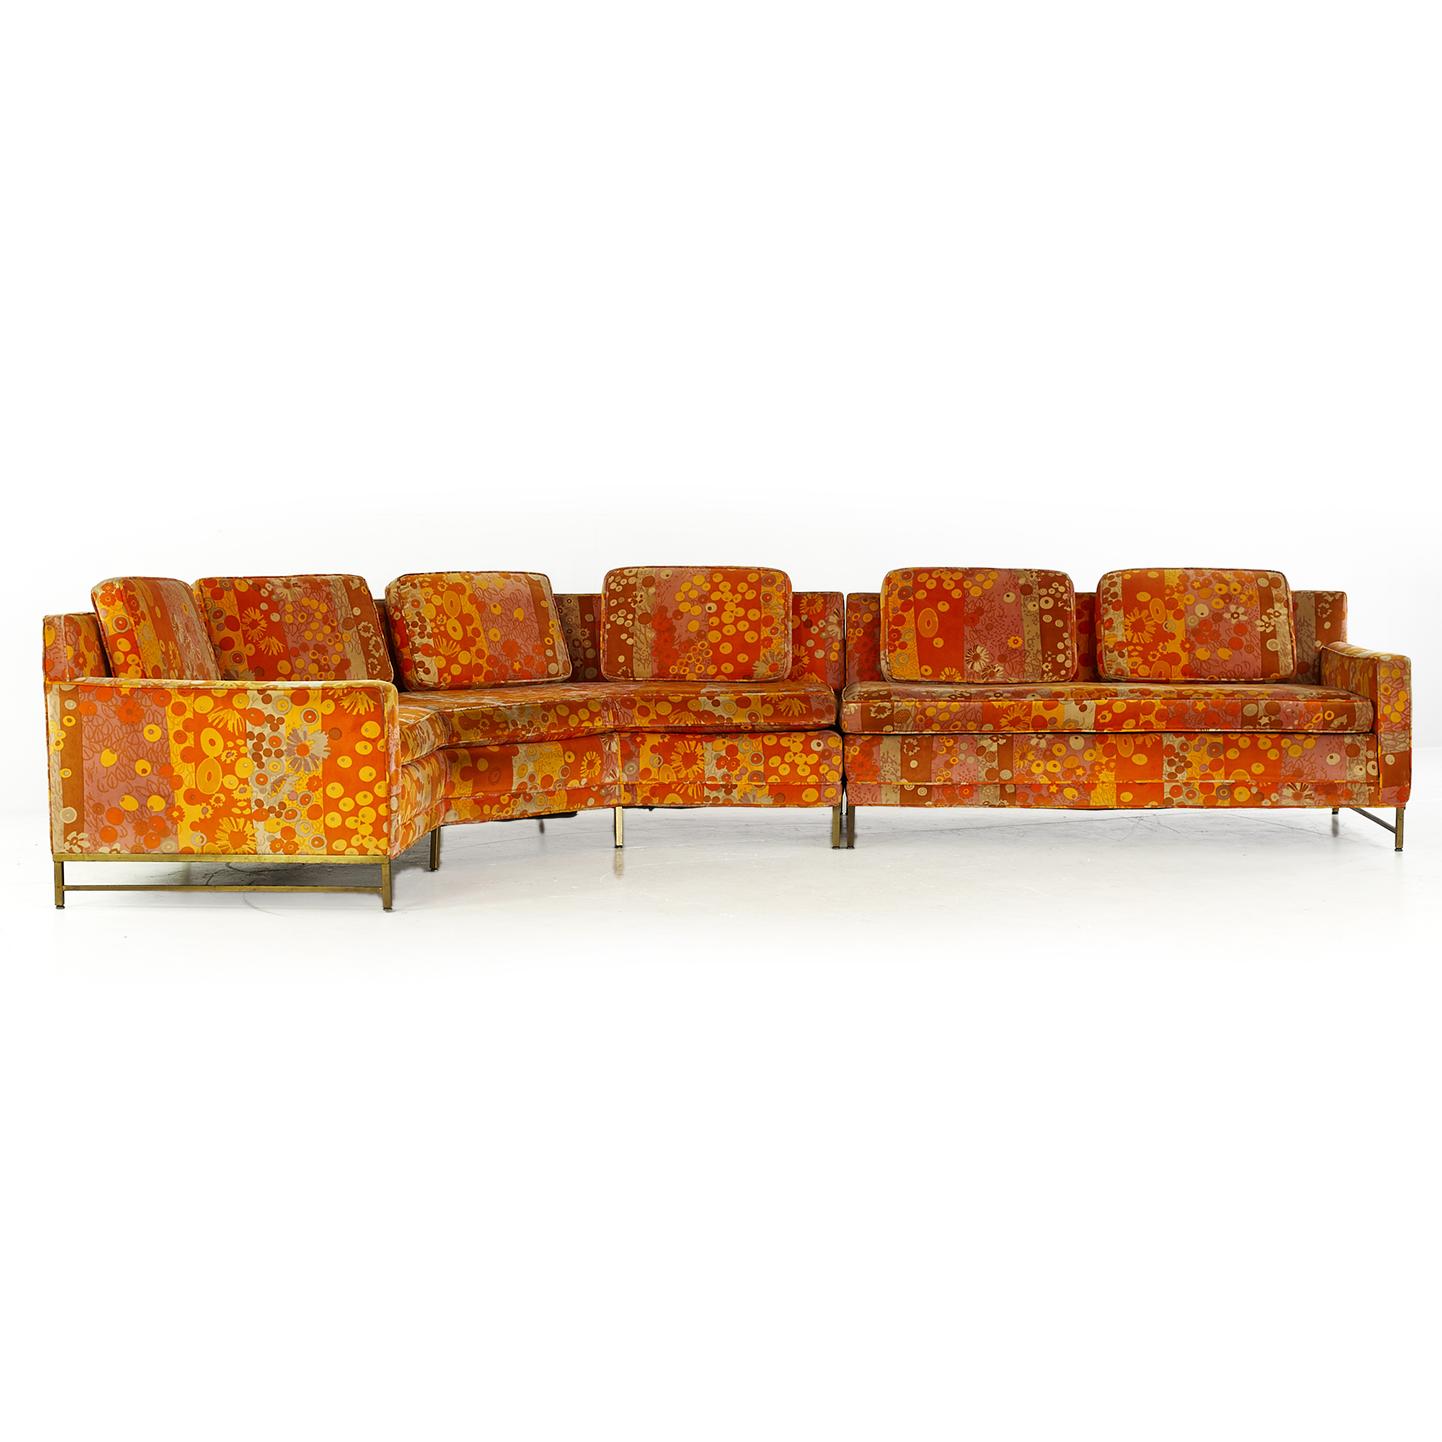 Paul McCobb for Directional midcentury sectional sofa with Jack Lenor Larsen Primavera Velvet Fabric

This sofa measures: 136 wide x 73 deep x 30 inches high, with a seat height of 17.5 and arm height of 21 inches

All pieces of furniture can be